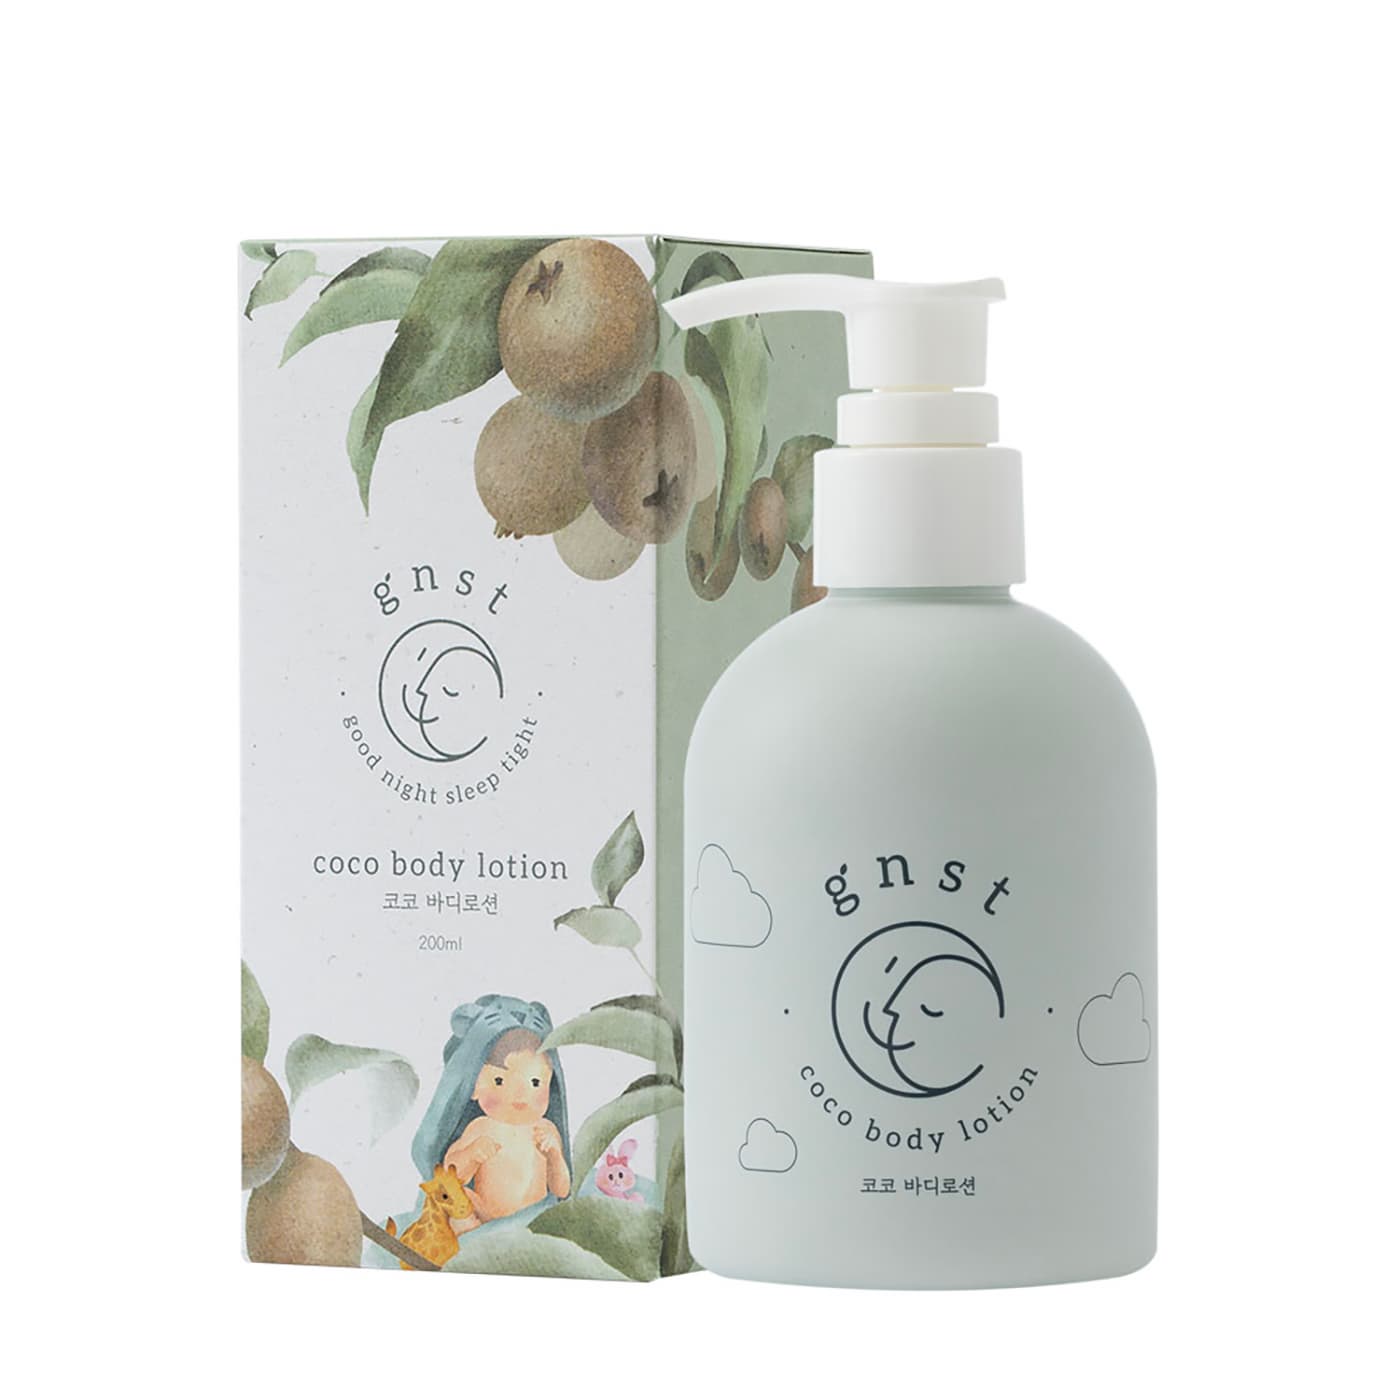 GNST Coco Body Lotion 200ml